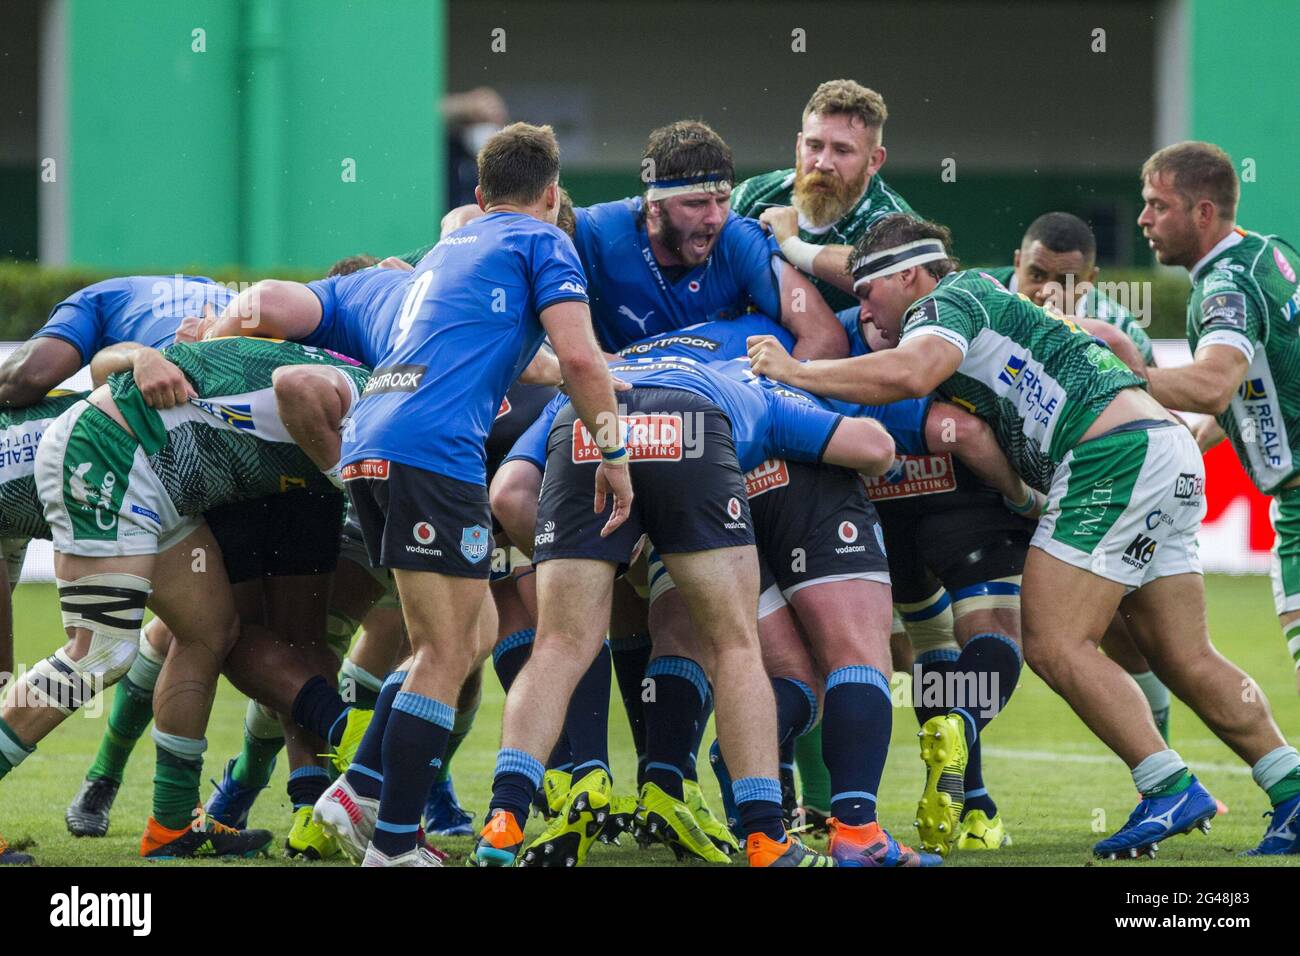 Treviso, Italy. 19th June, 2021. Ruan Nortje (Vodacom Bulls) during Rainbow  Cup 2021 Final - Benetton Treviso vs Vodacom Blue Bulls, Rugby Guinness Pro  14 match in Treviso, Italy, June 19 2021